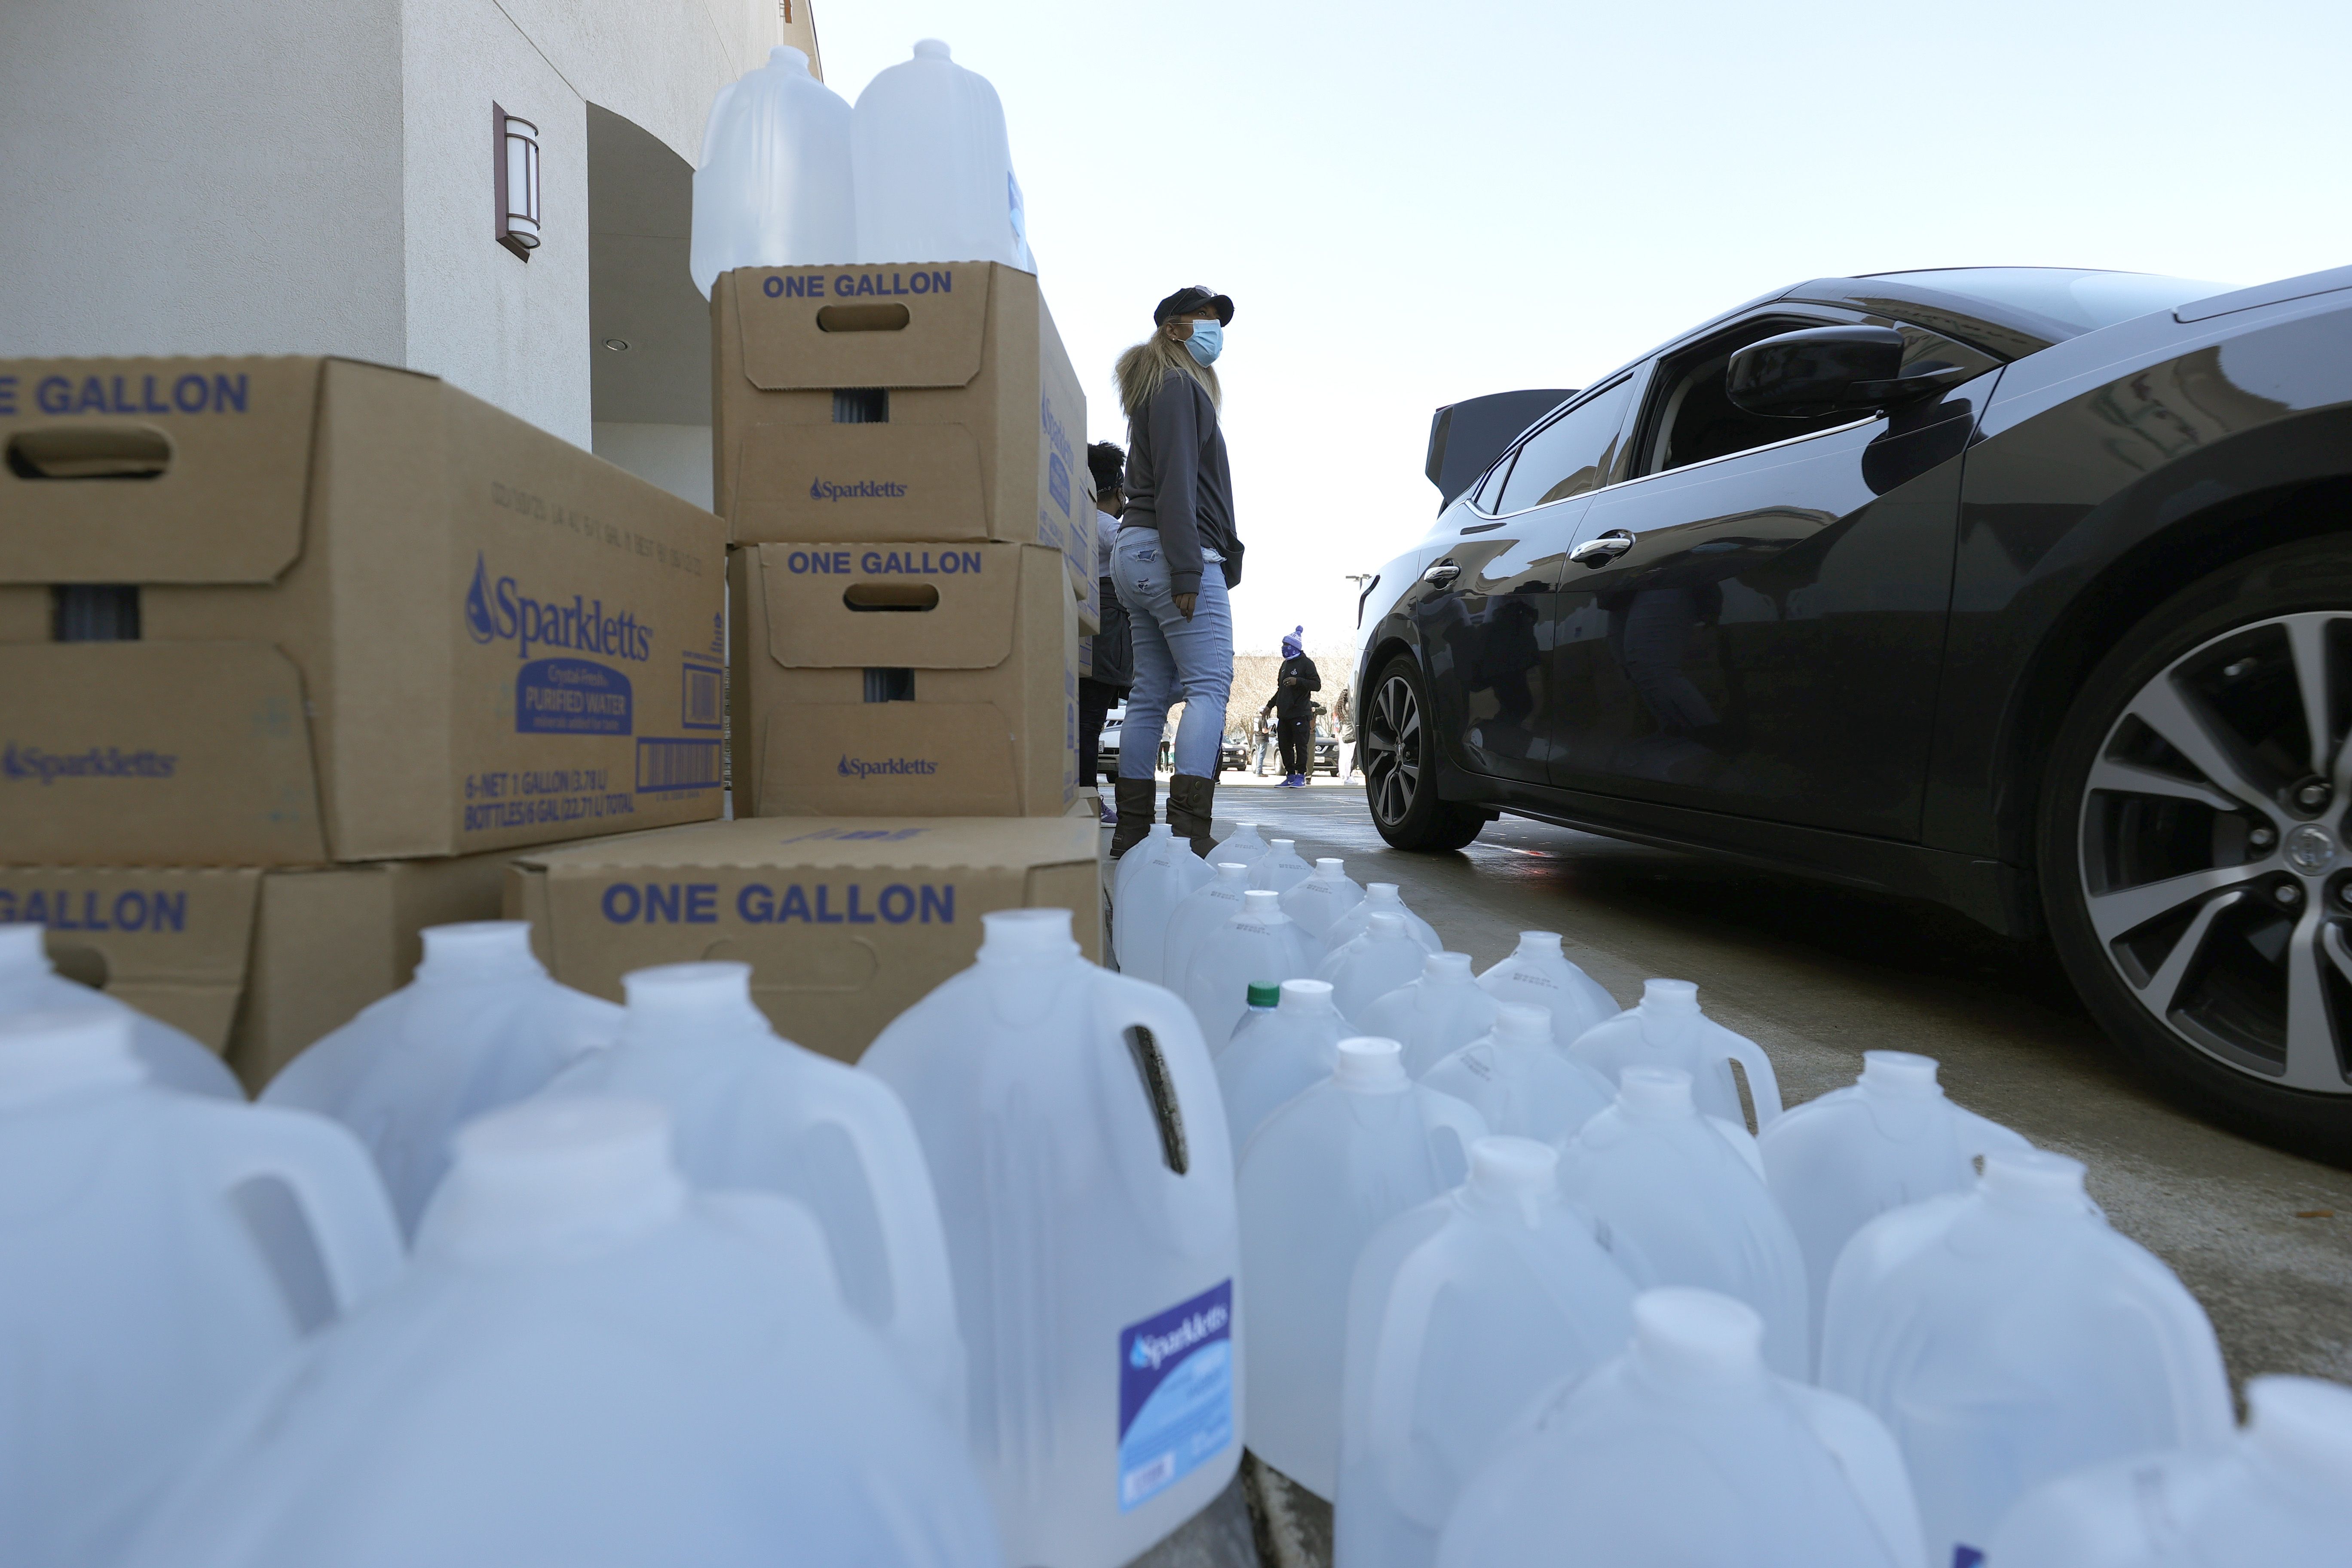 Dozens of gallons of water sit on the ground next to a car and cardboard boxes